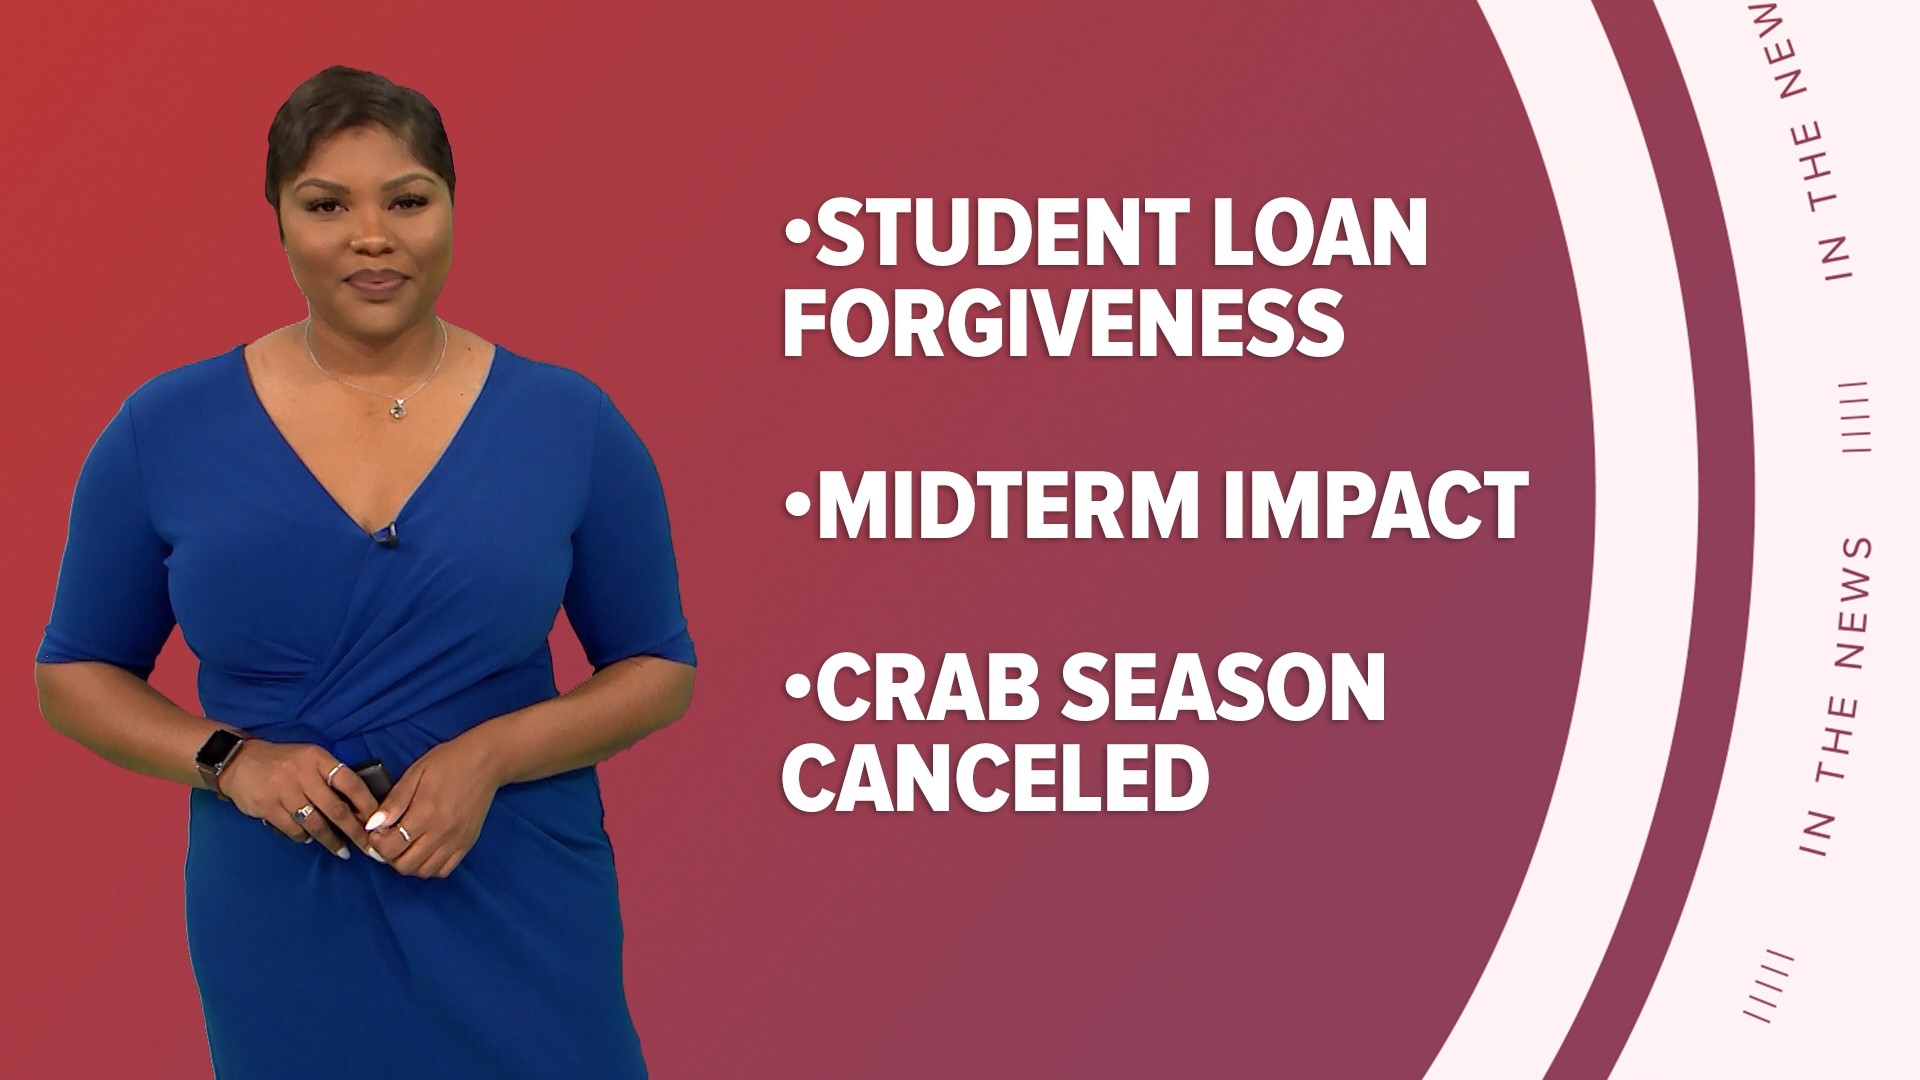 A look at what is happening in the news from the student loan forgiveness site for applications going live to the Alaska snow and king crab seasons canceled.